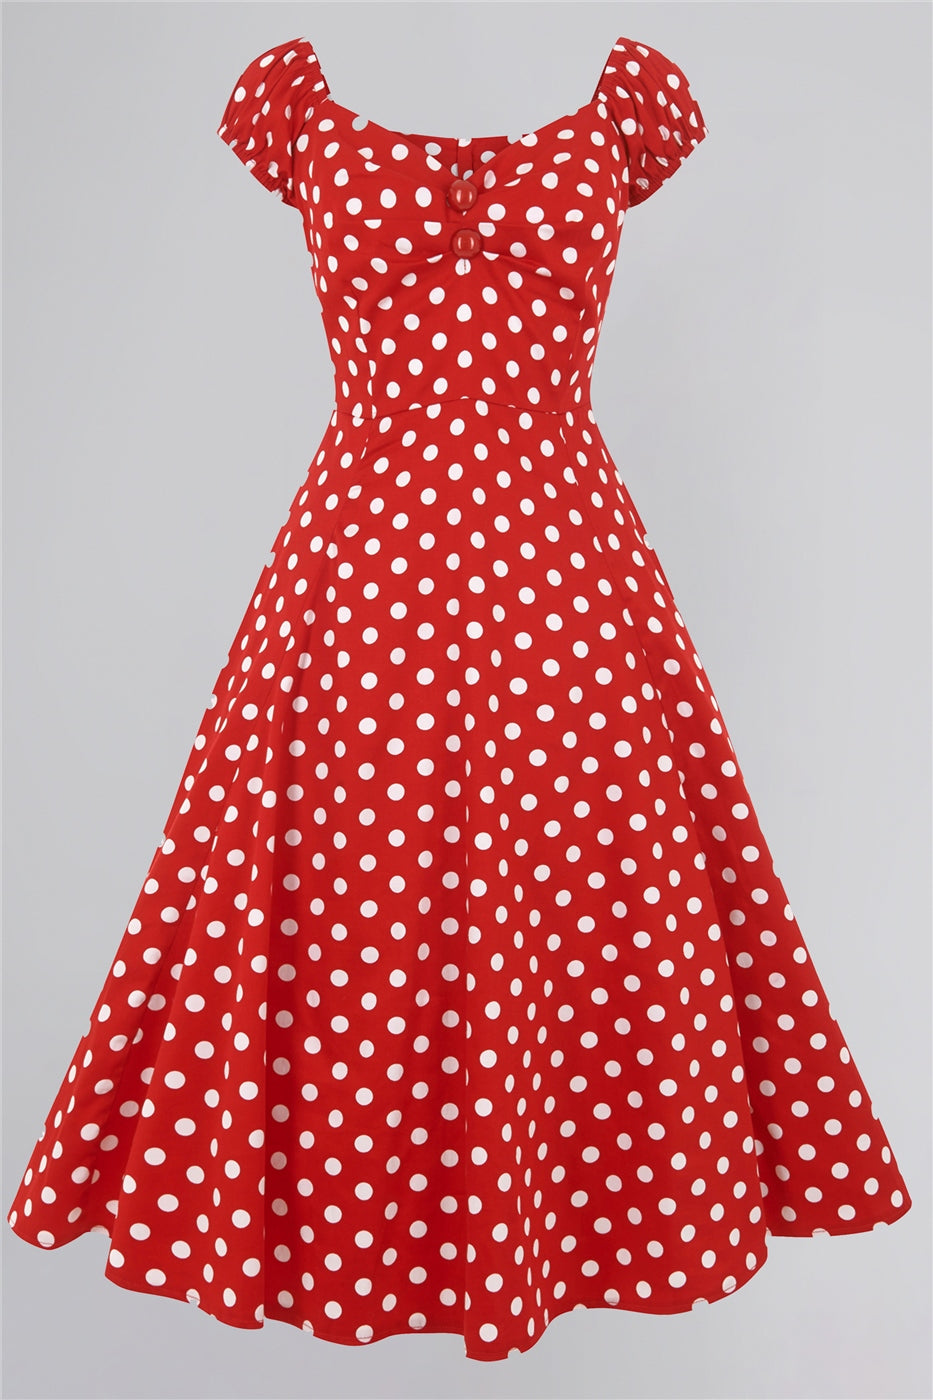 Dolores Doll Dress in Red Polka by Collectif